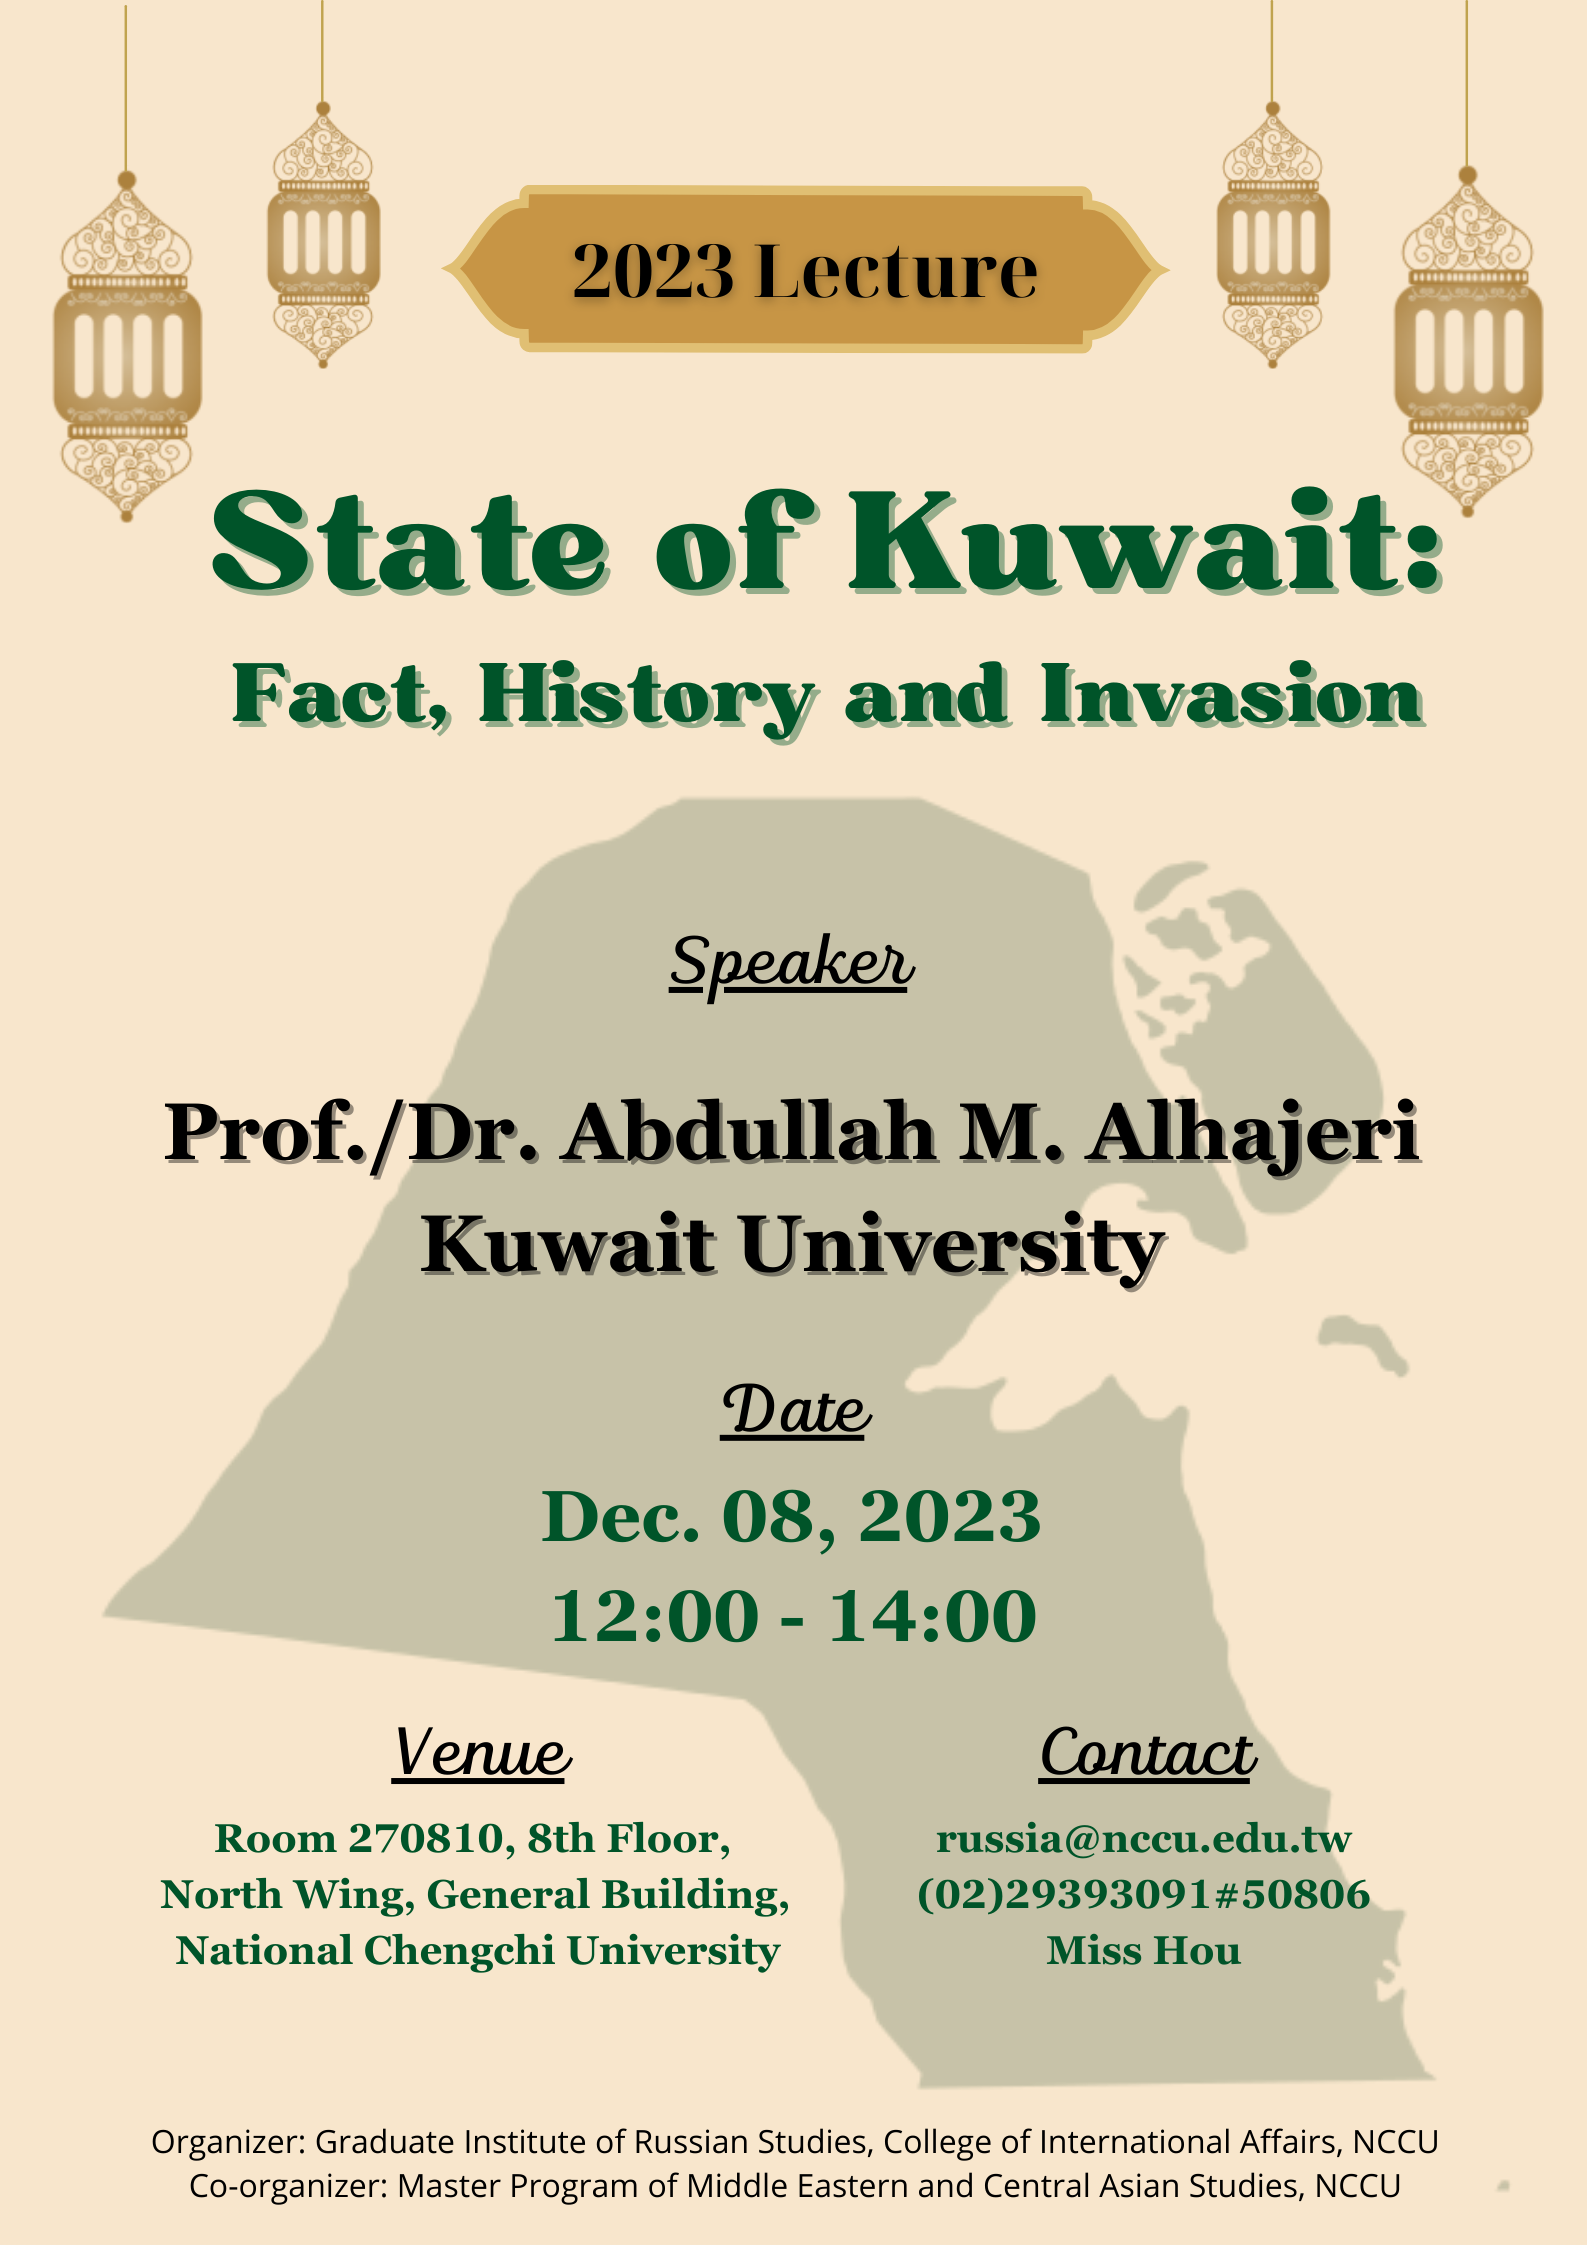 【Lecture】State of Kuwait: Fact, History and Invasion